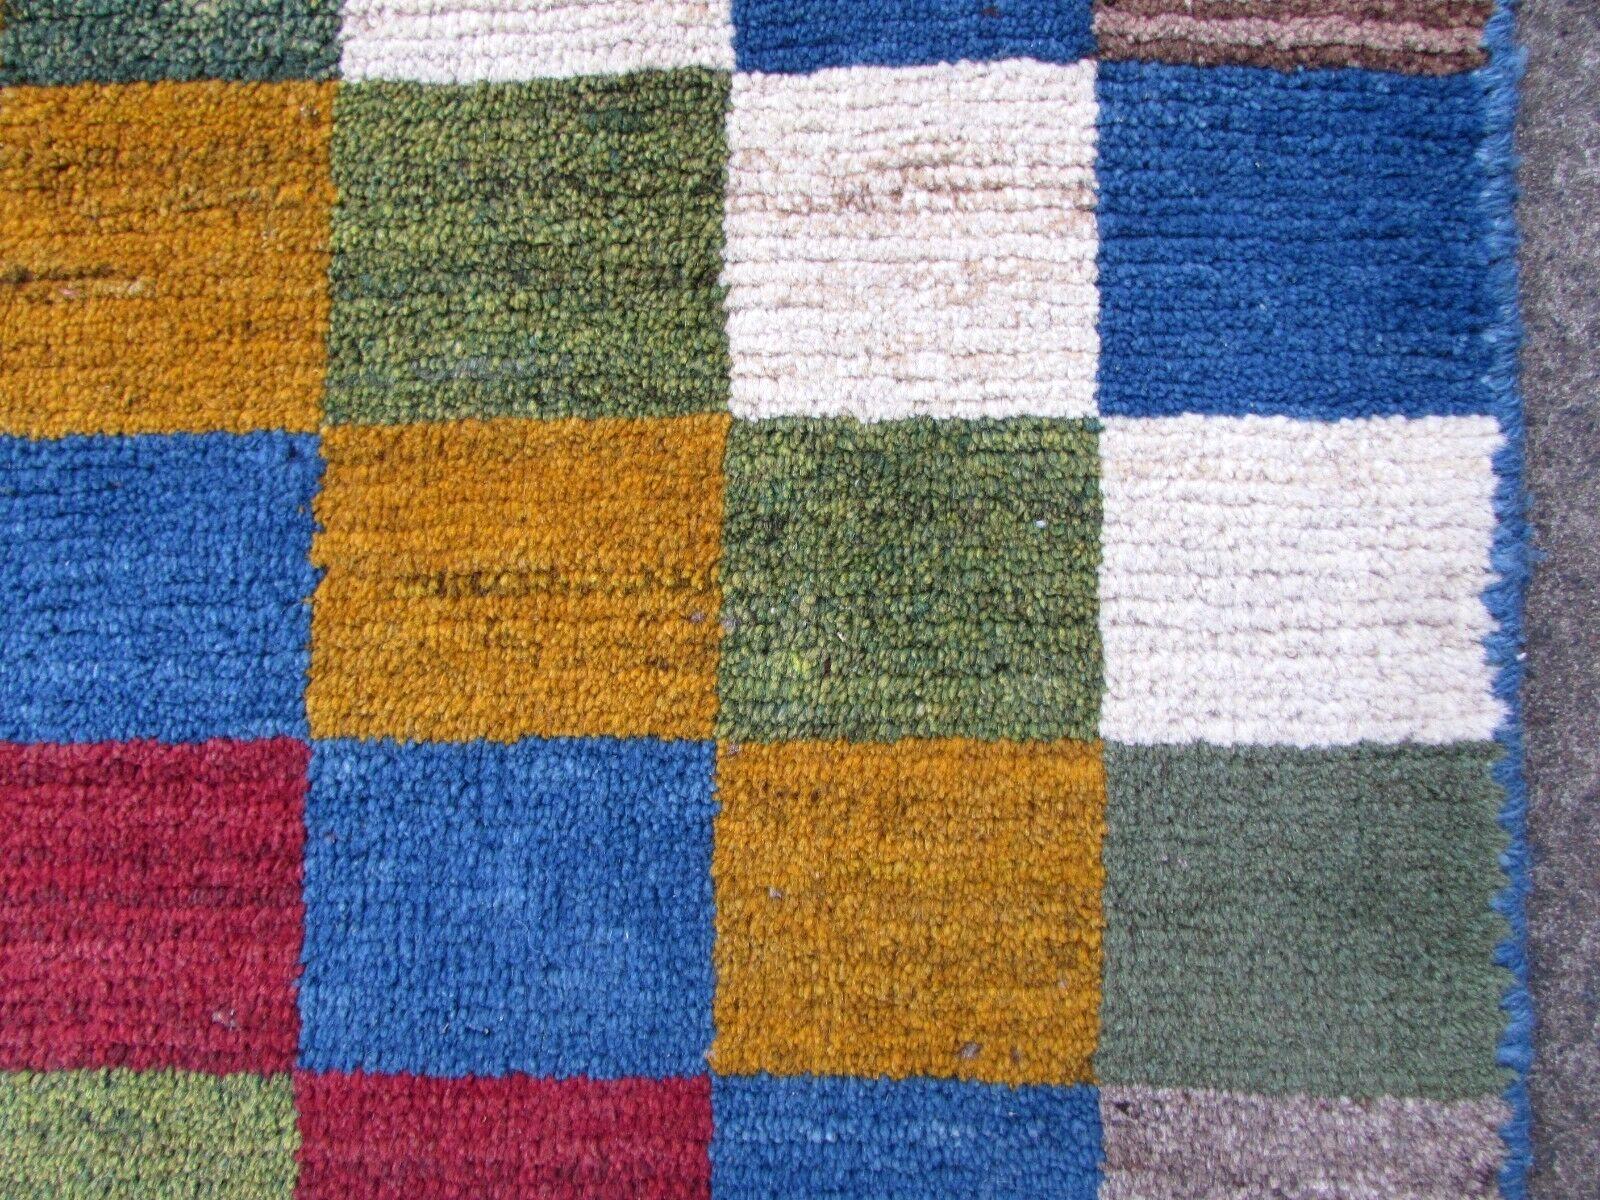 Handmade vintage Gabbeh rug in colorful wool. The rug is from the end of 20th century in original good condition.

-Condition: Original good,

-circa 1970s,

-Size: 3.4' x 4.6' (103cm x 140cm),

-Material: Wool,

-Country of origin: Middle